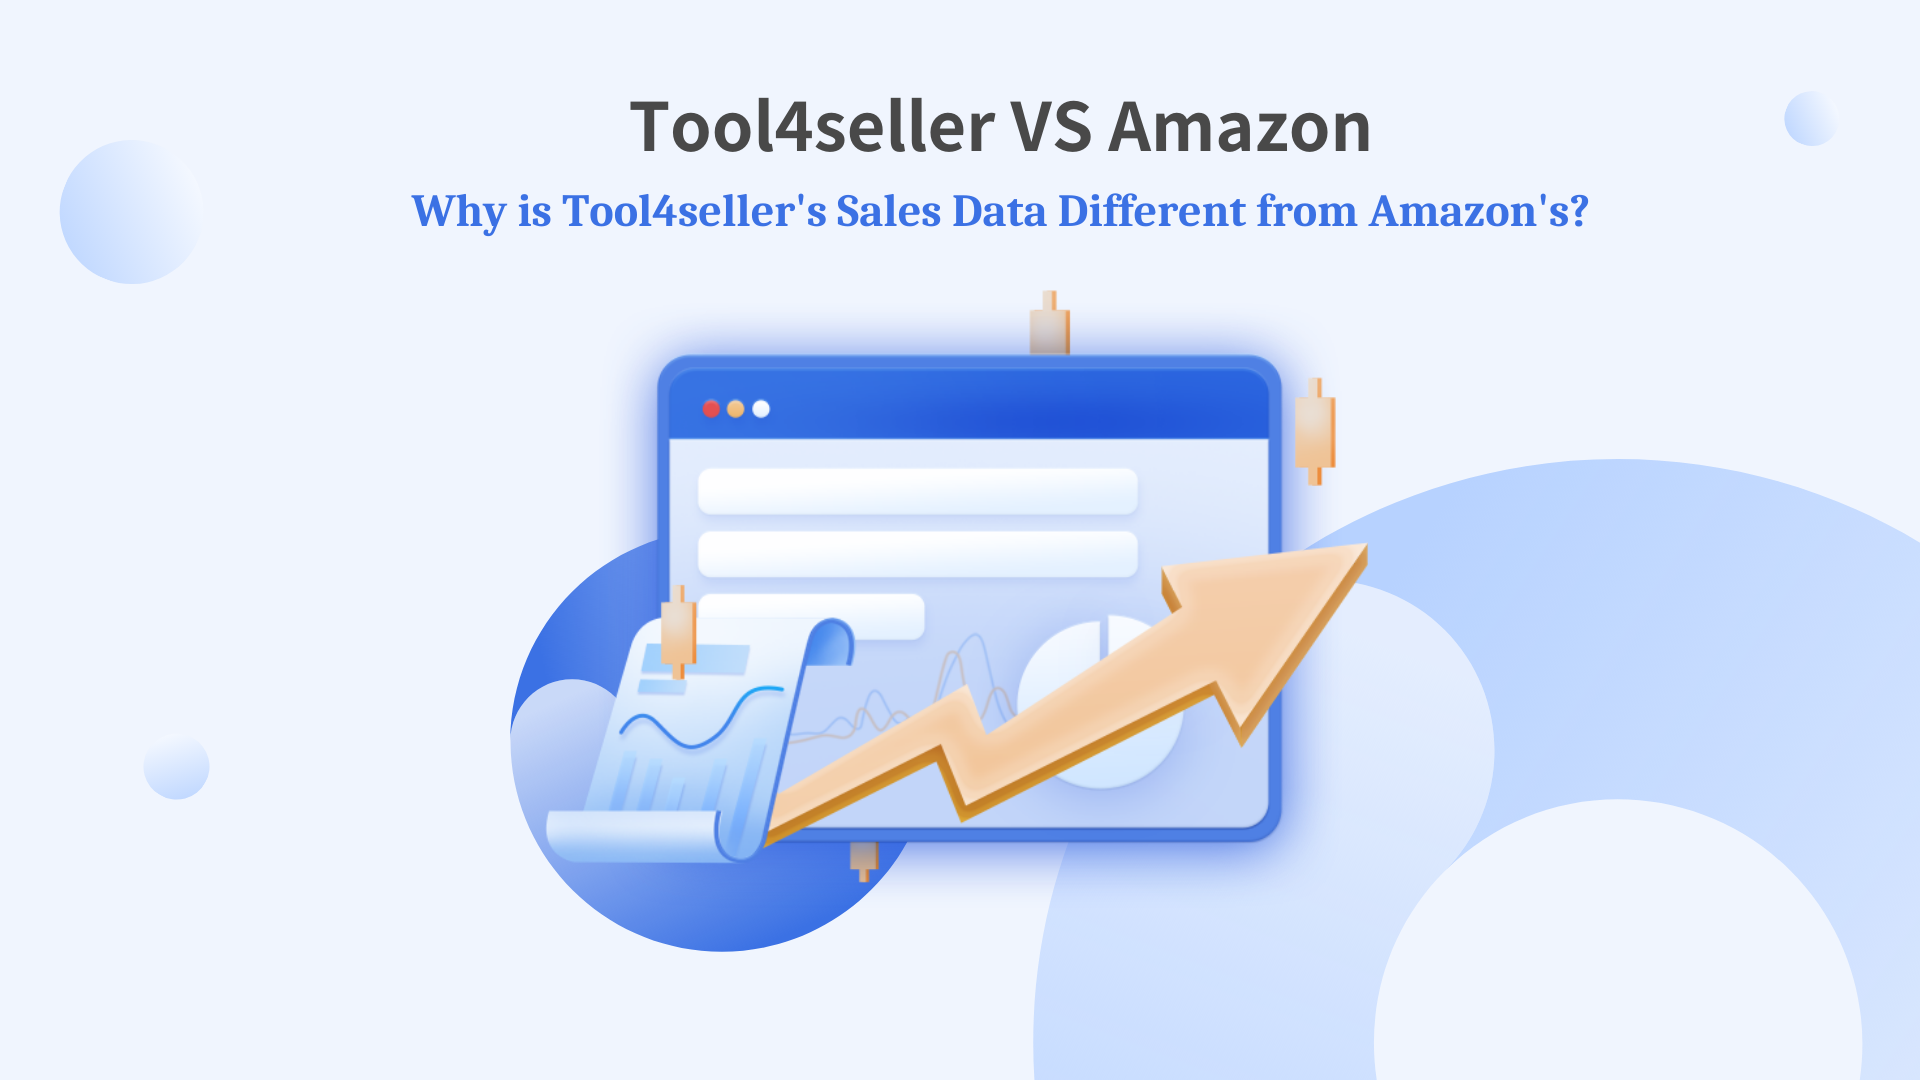 Why is Tool4seller’s Sales Data Different from Amazon’s?